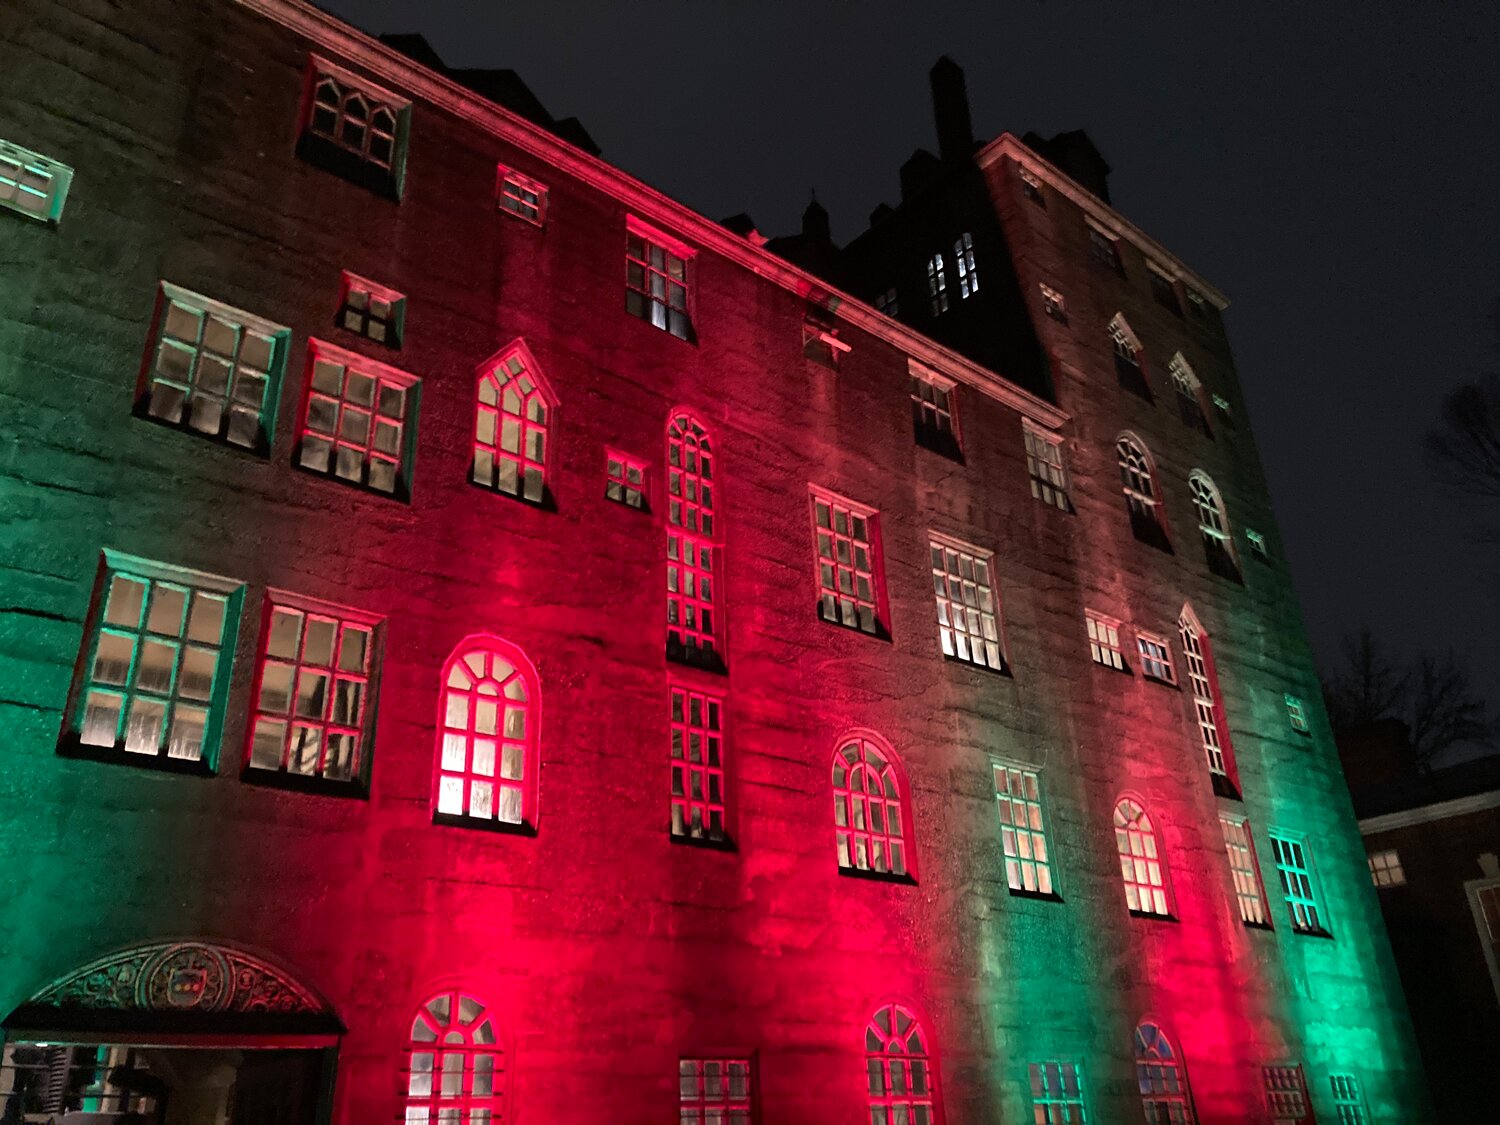 The Mercer Museum is bathed in red and green lights for the Mercer Museum Holiday Open House.